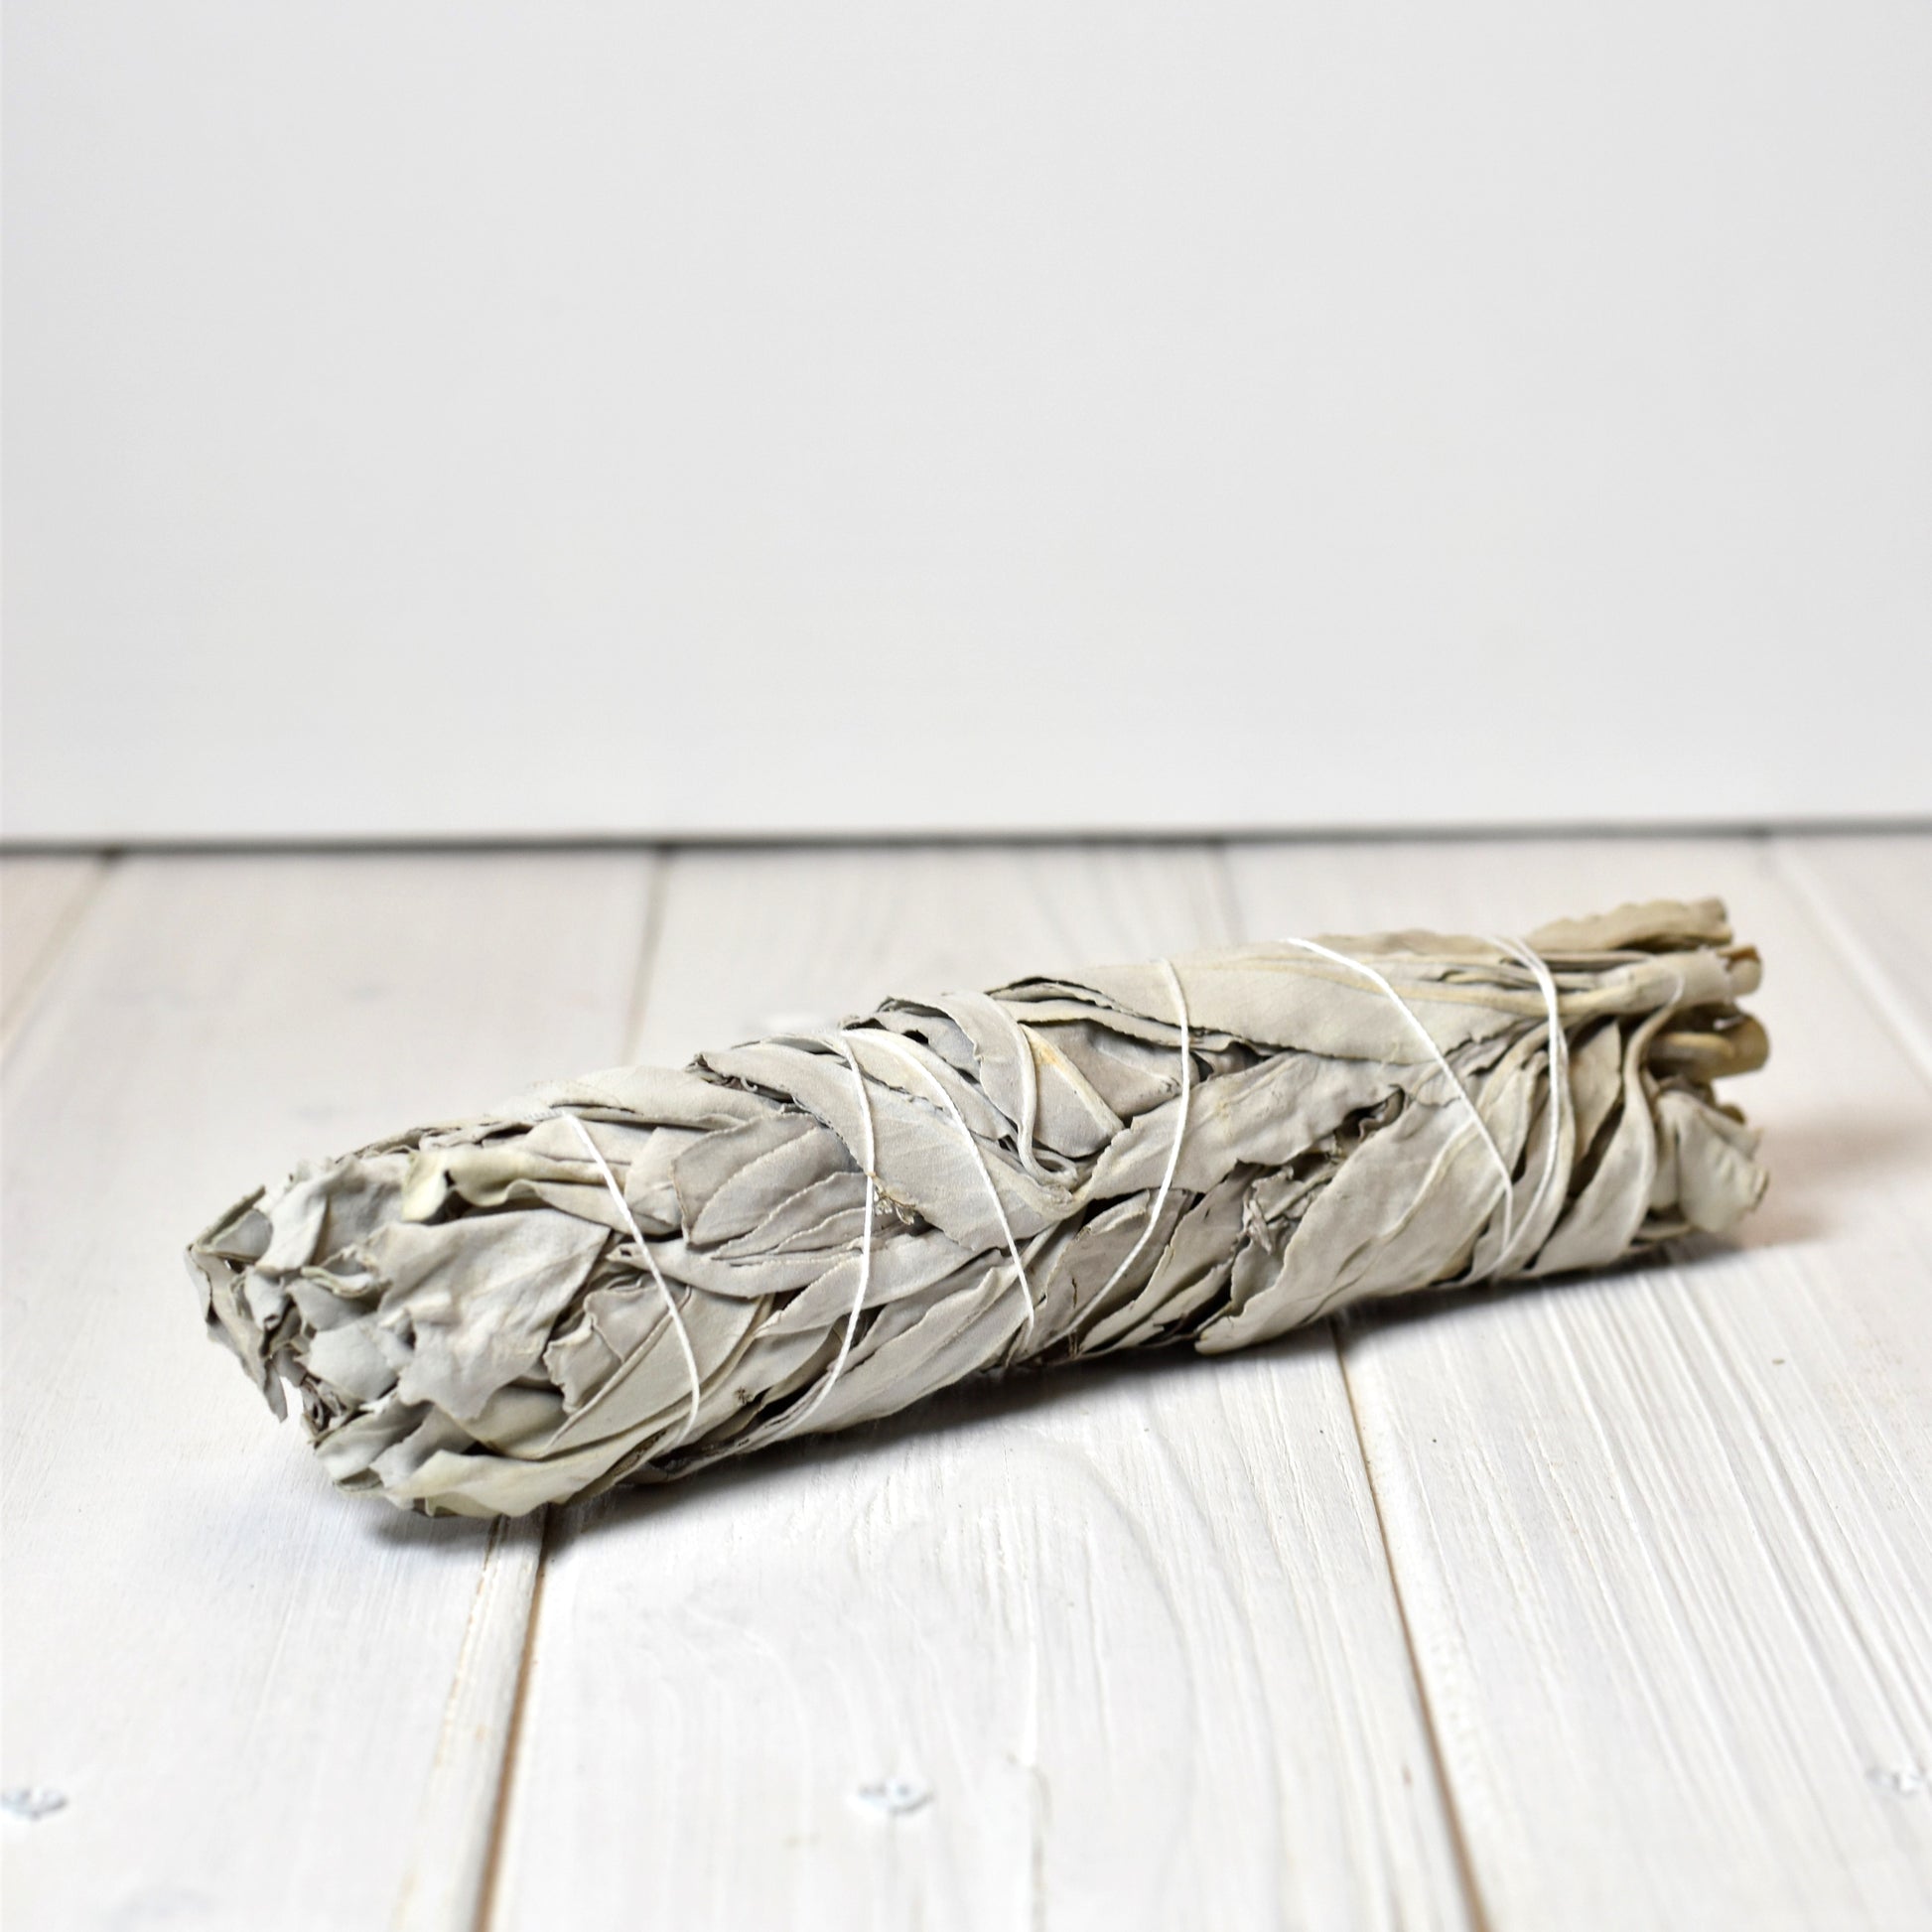 White Sage Smudge Wands